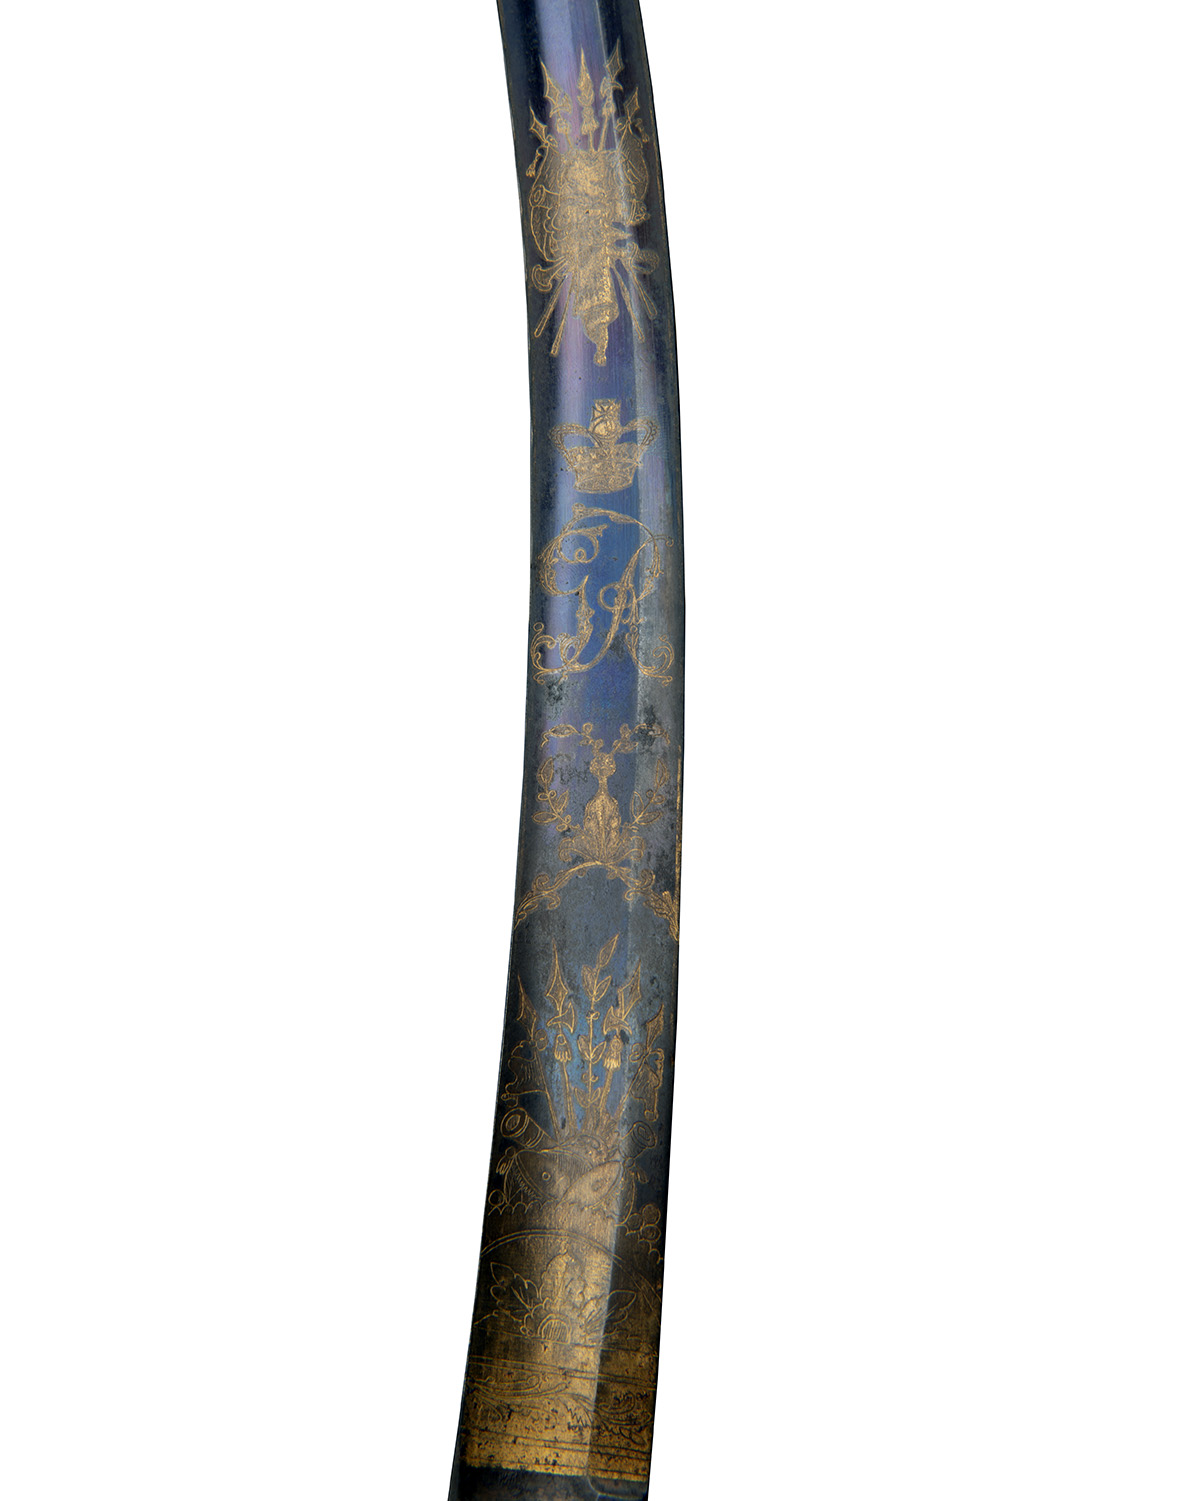 A BRITISH 1803 PATTERN INFANTRY or FLANK OFFICER'S SWORD WITH BLUE AND GILT BLADE, UNSIGNED, circa - Image 7 of 7